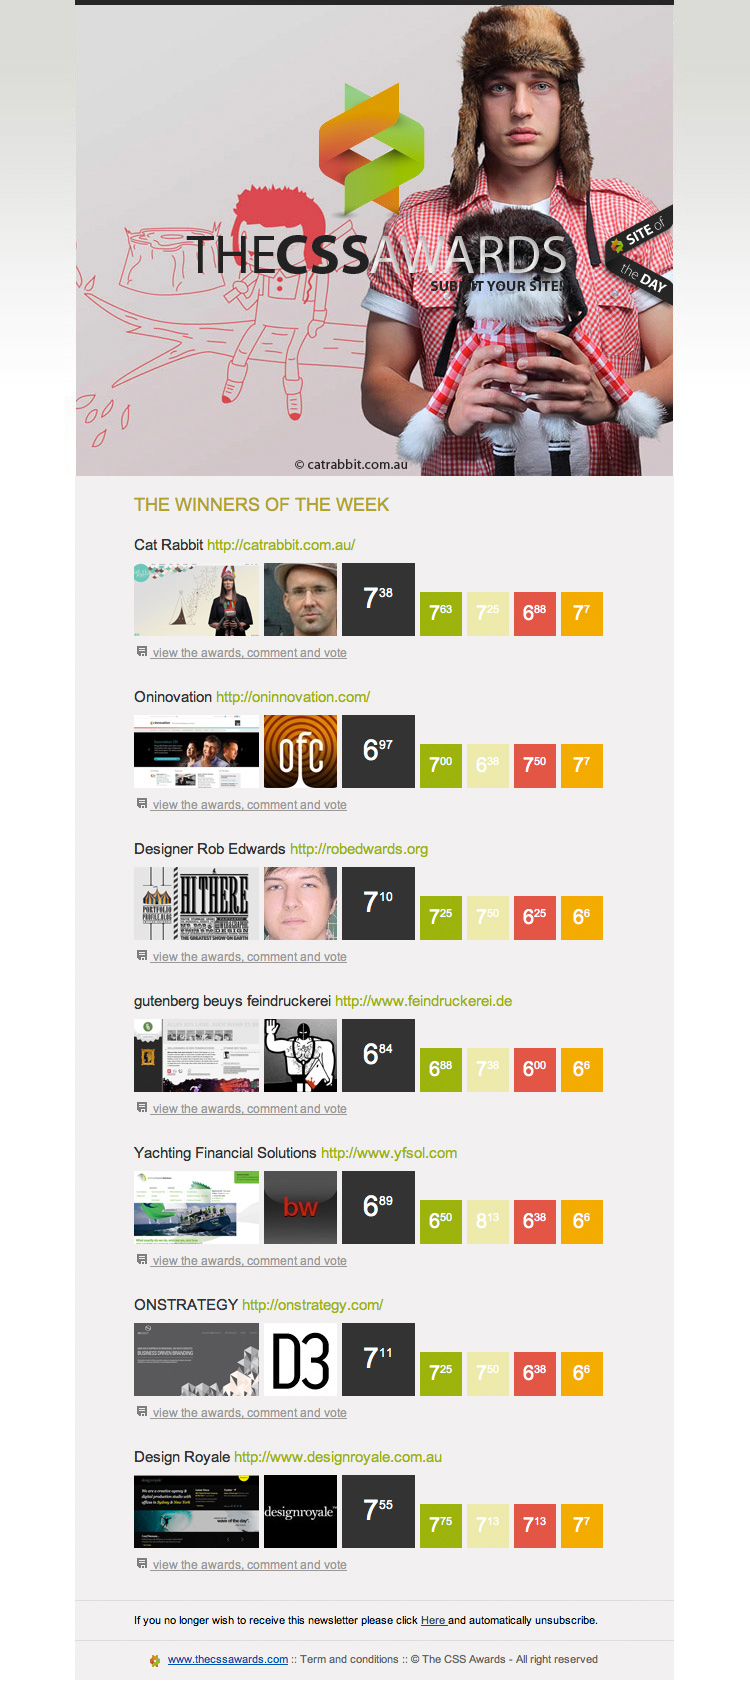 The CSS Awards Weekly Winner email